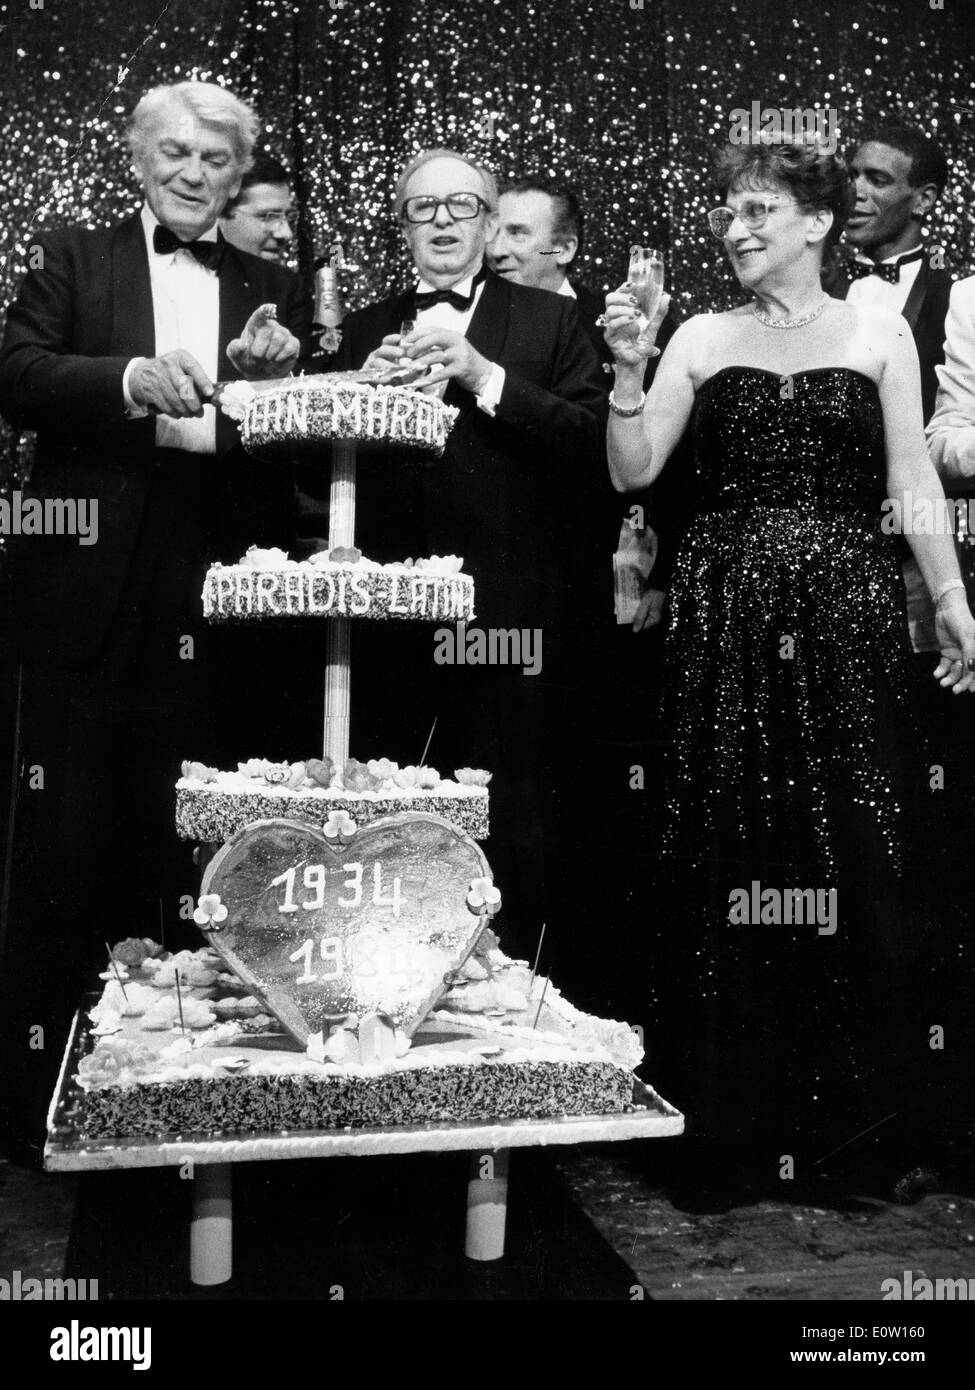 Actor Jean Marais cutting the cake at a party Stock Photo